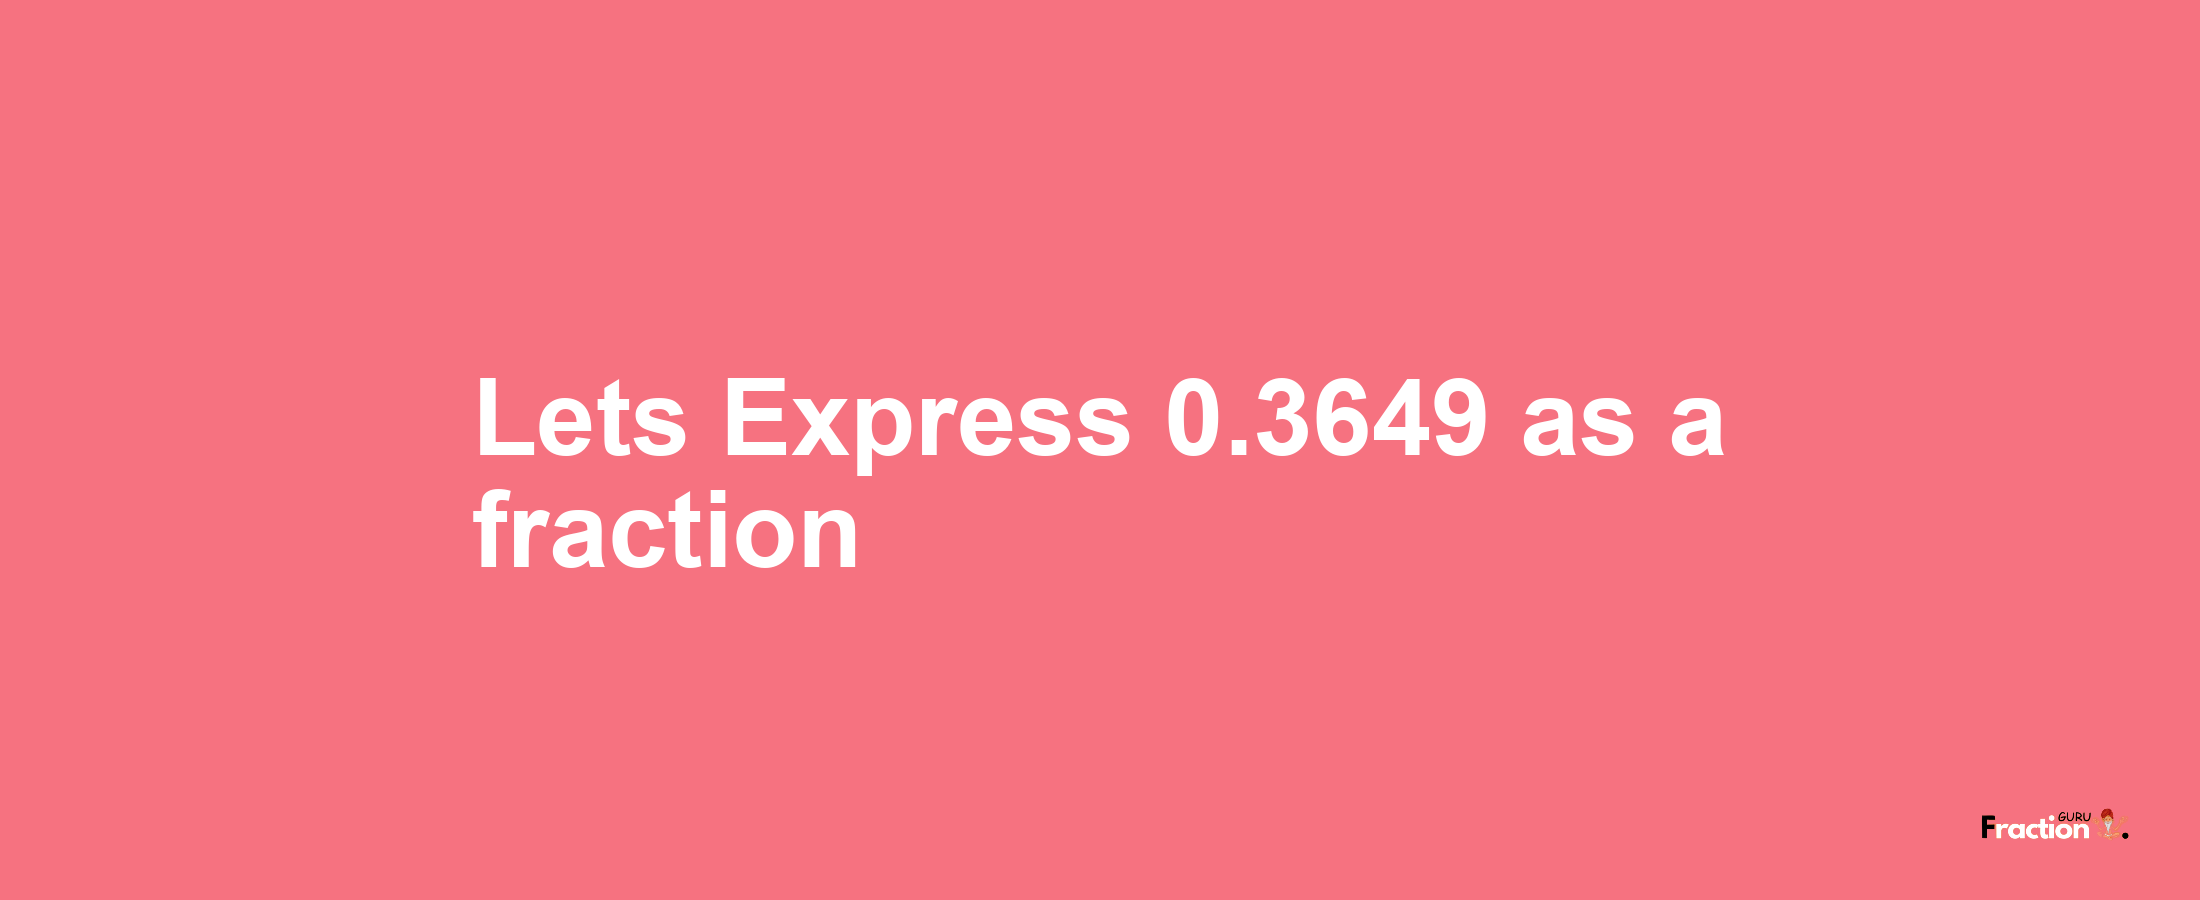 Lets Express 0.3649 as afraction